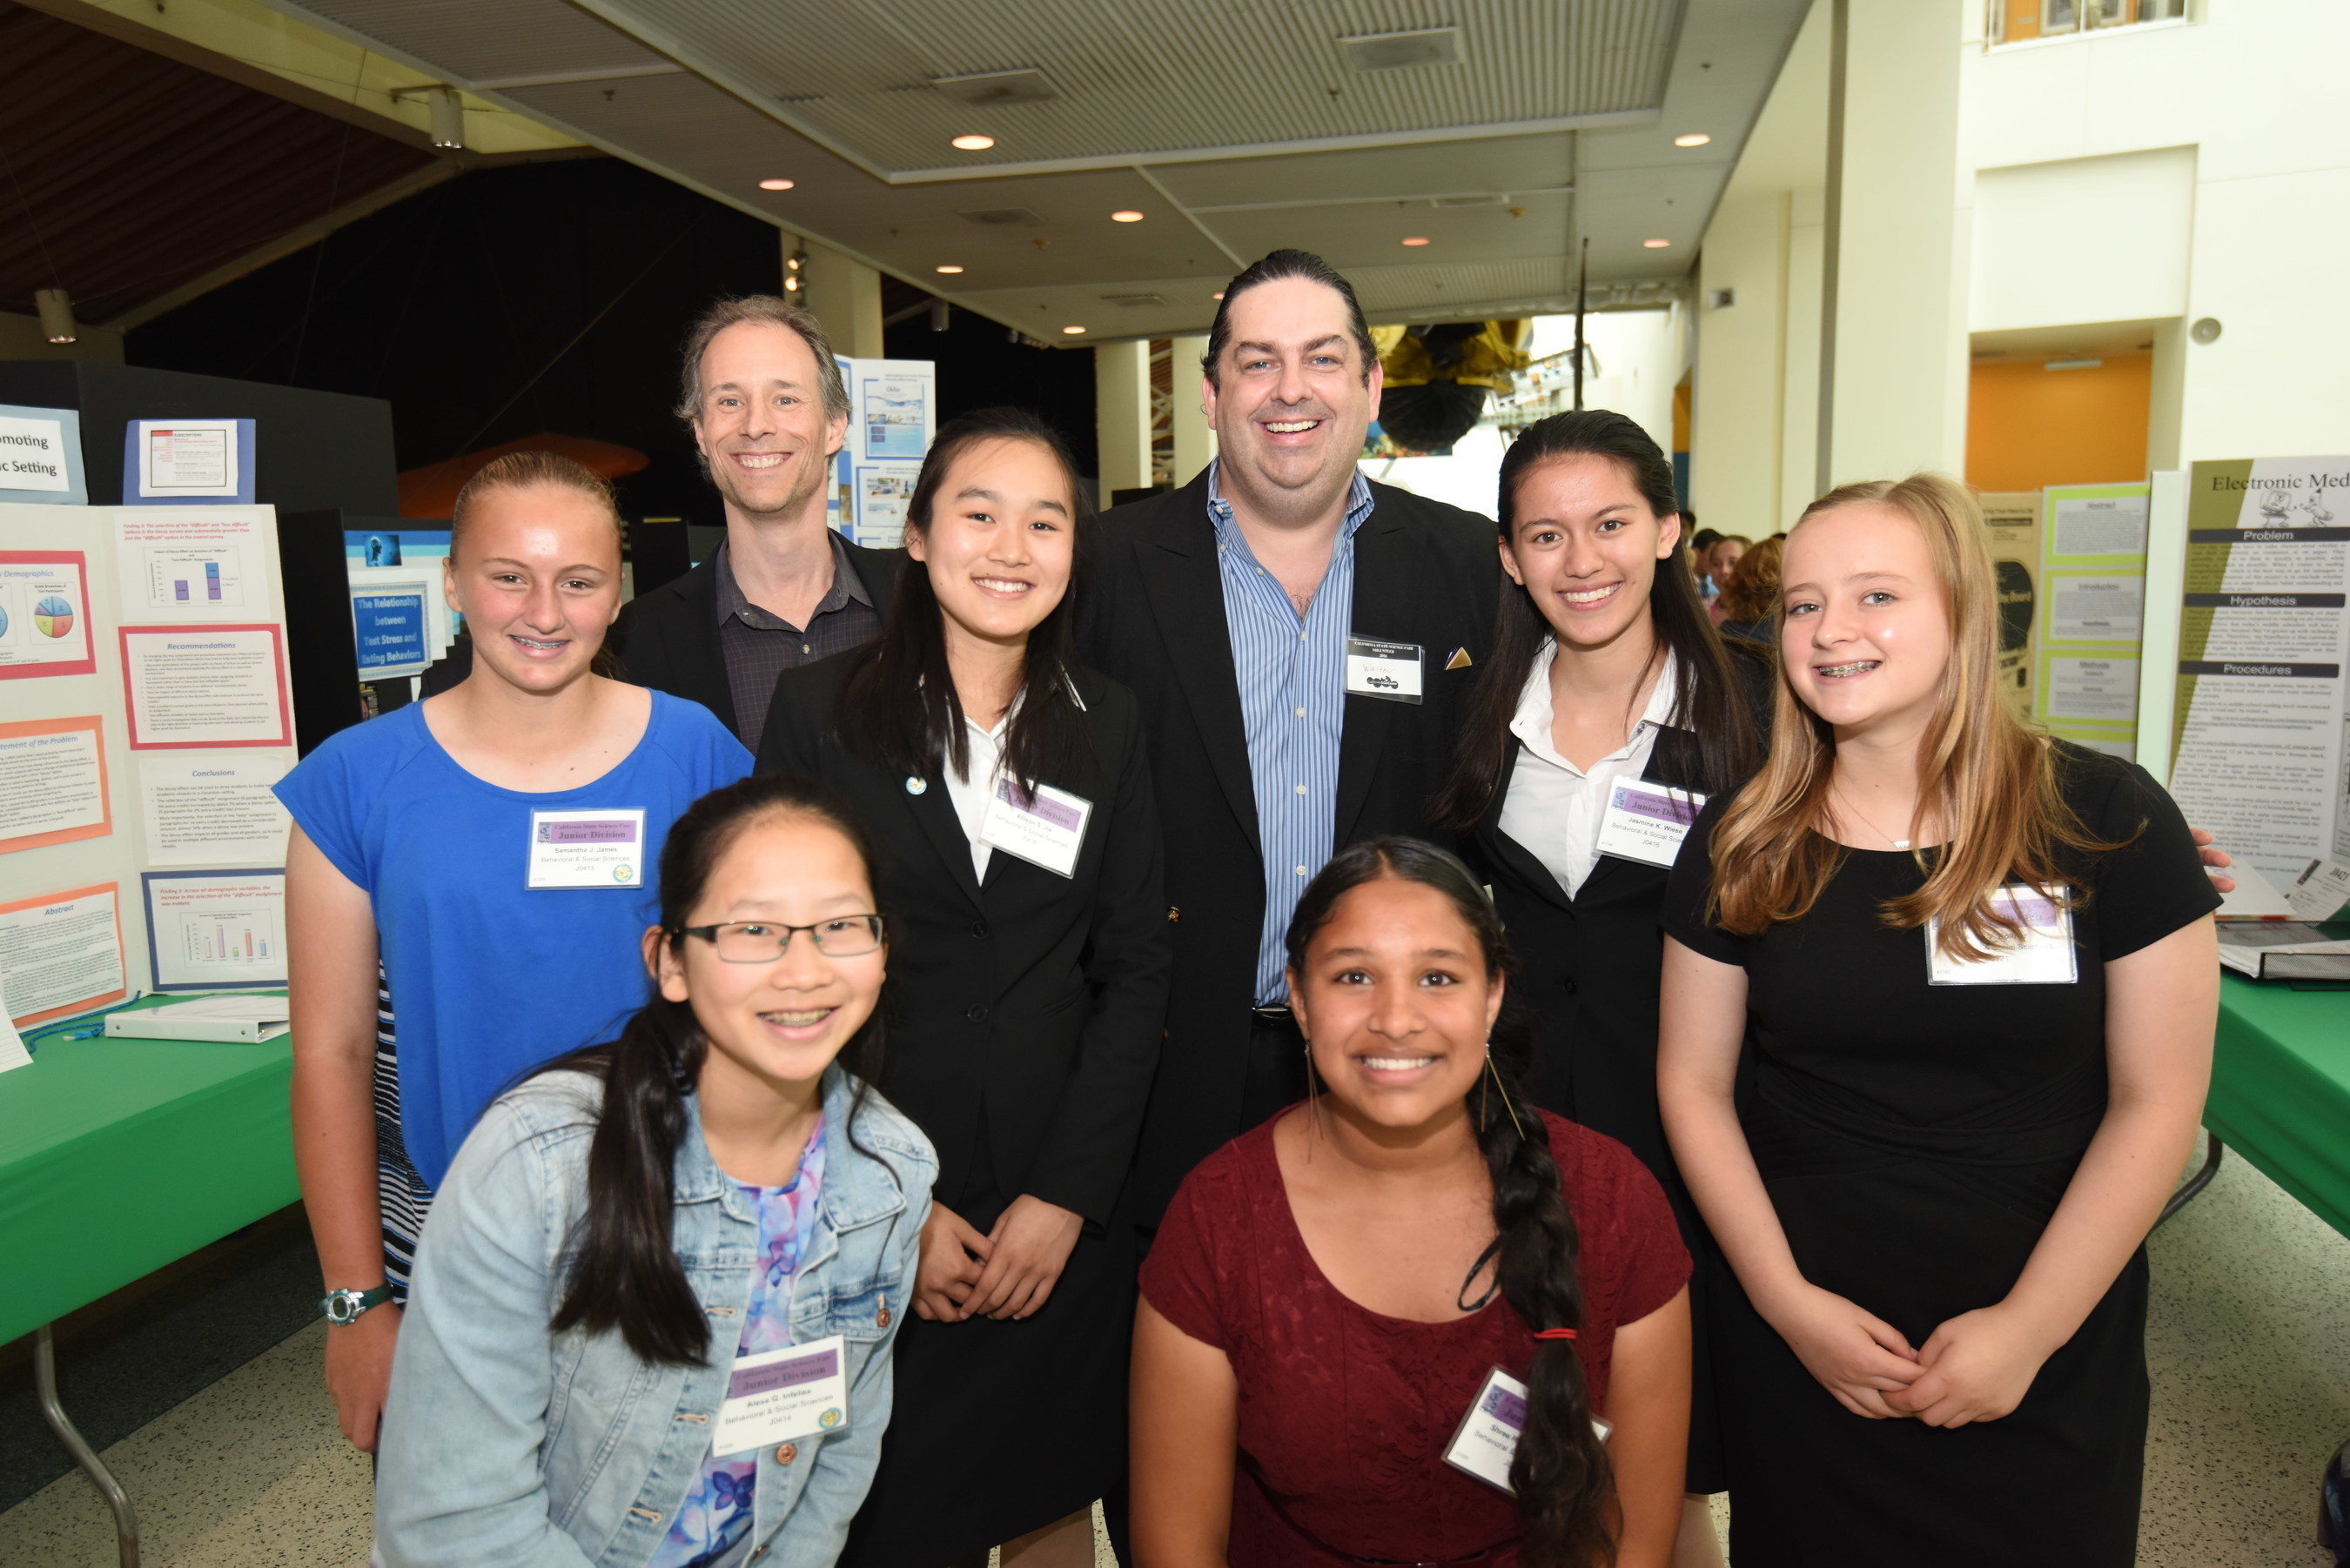 Walter O'Brien at California Science Center speaks on STEM topics at student science competition